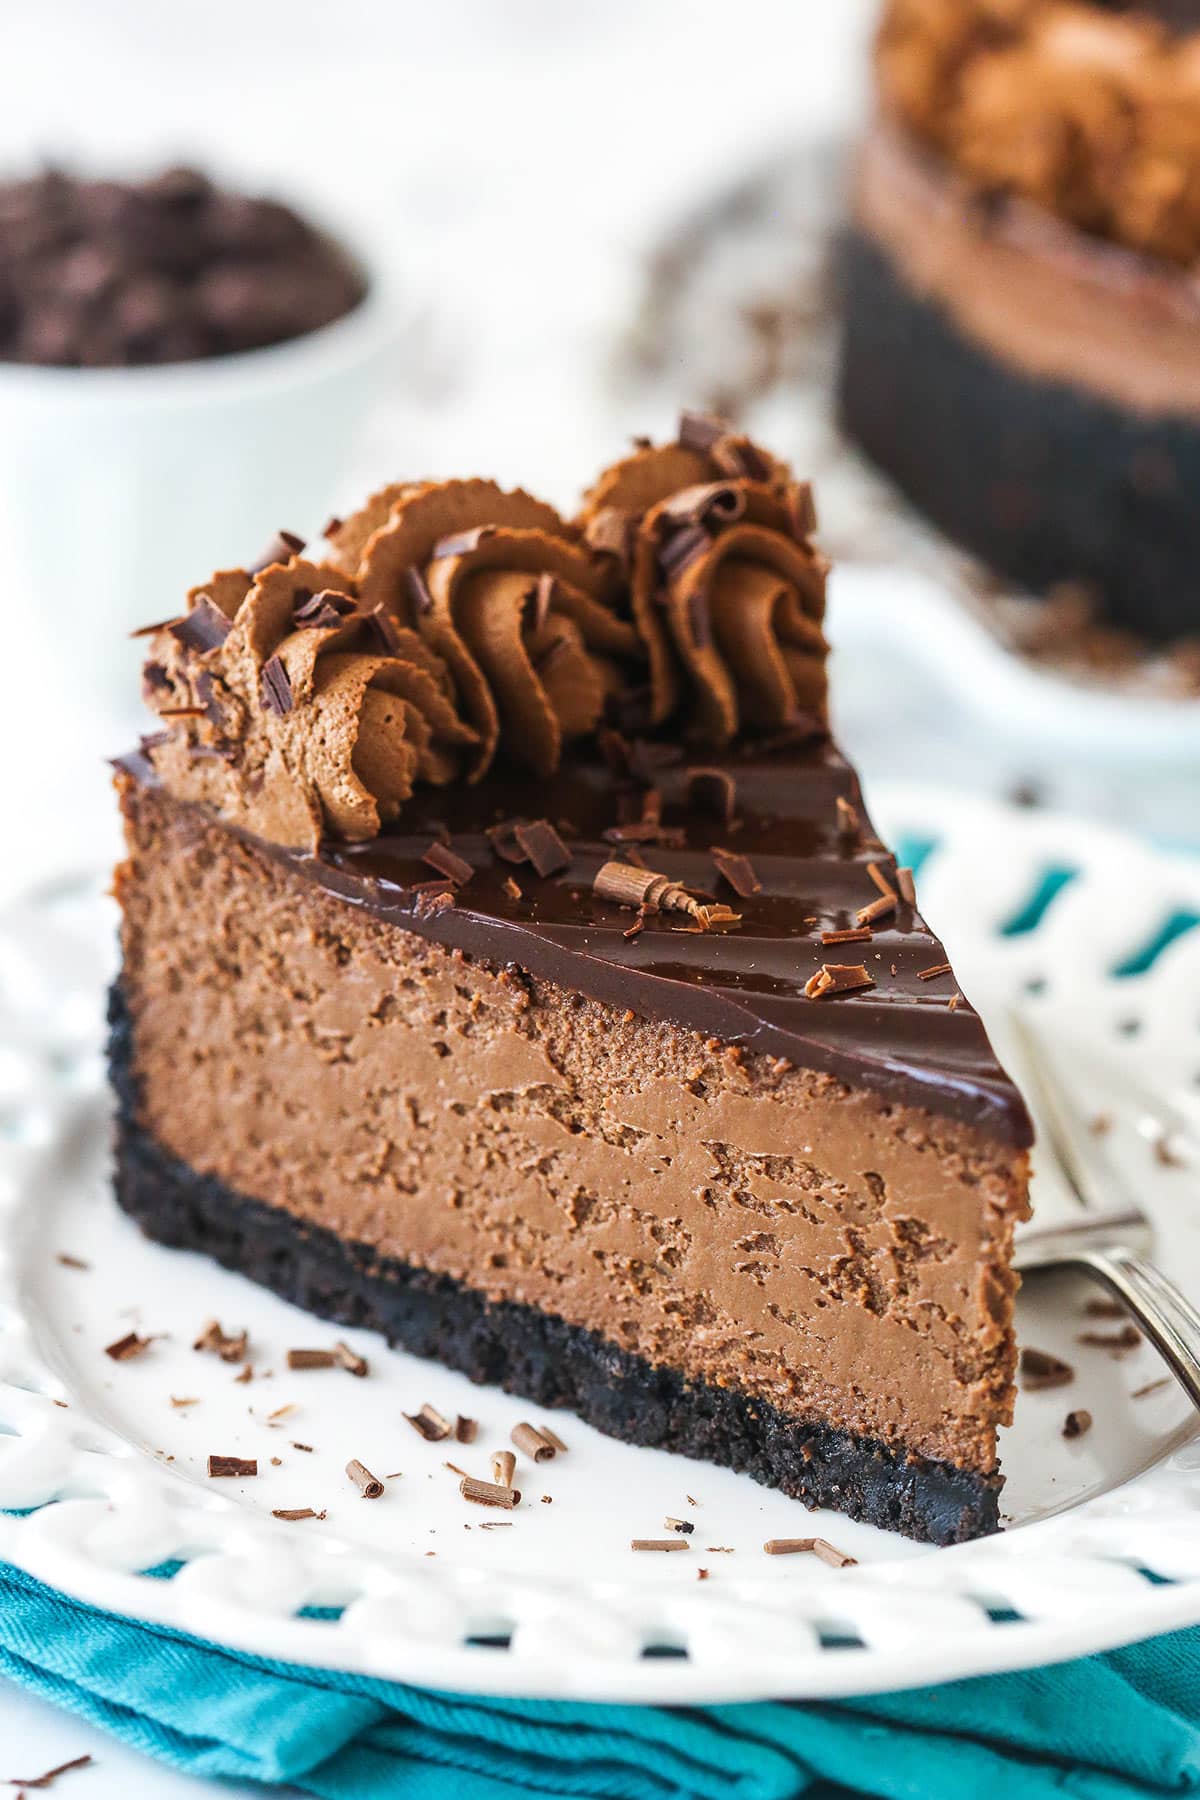 A slice of chocolate cheesecake on a plate.